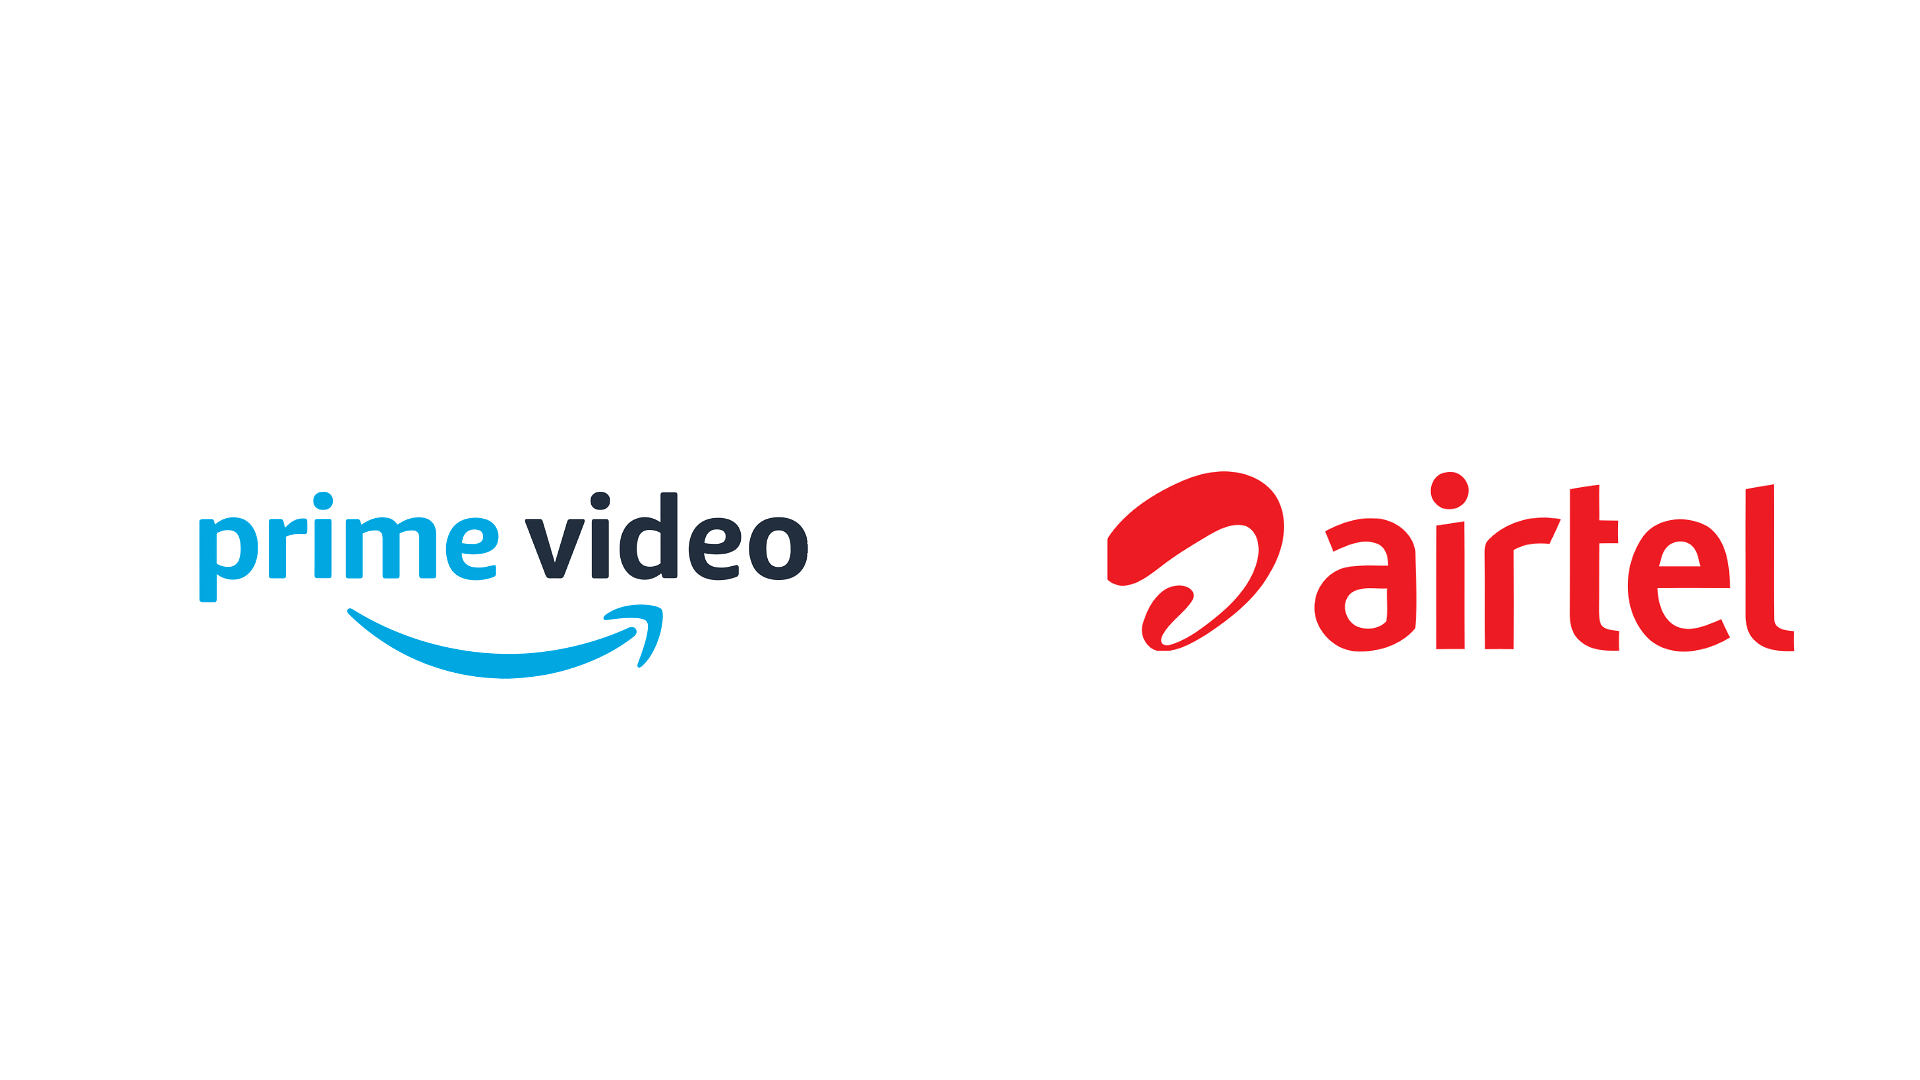 Amazon Prime Video has collaborated with Airtel to offer mobile-only plans in India.